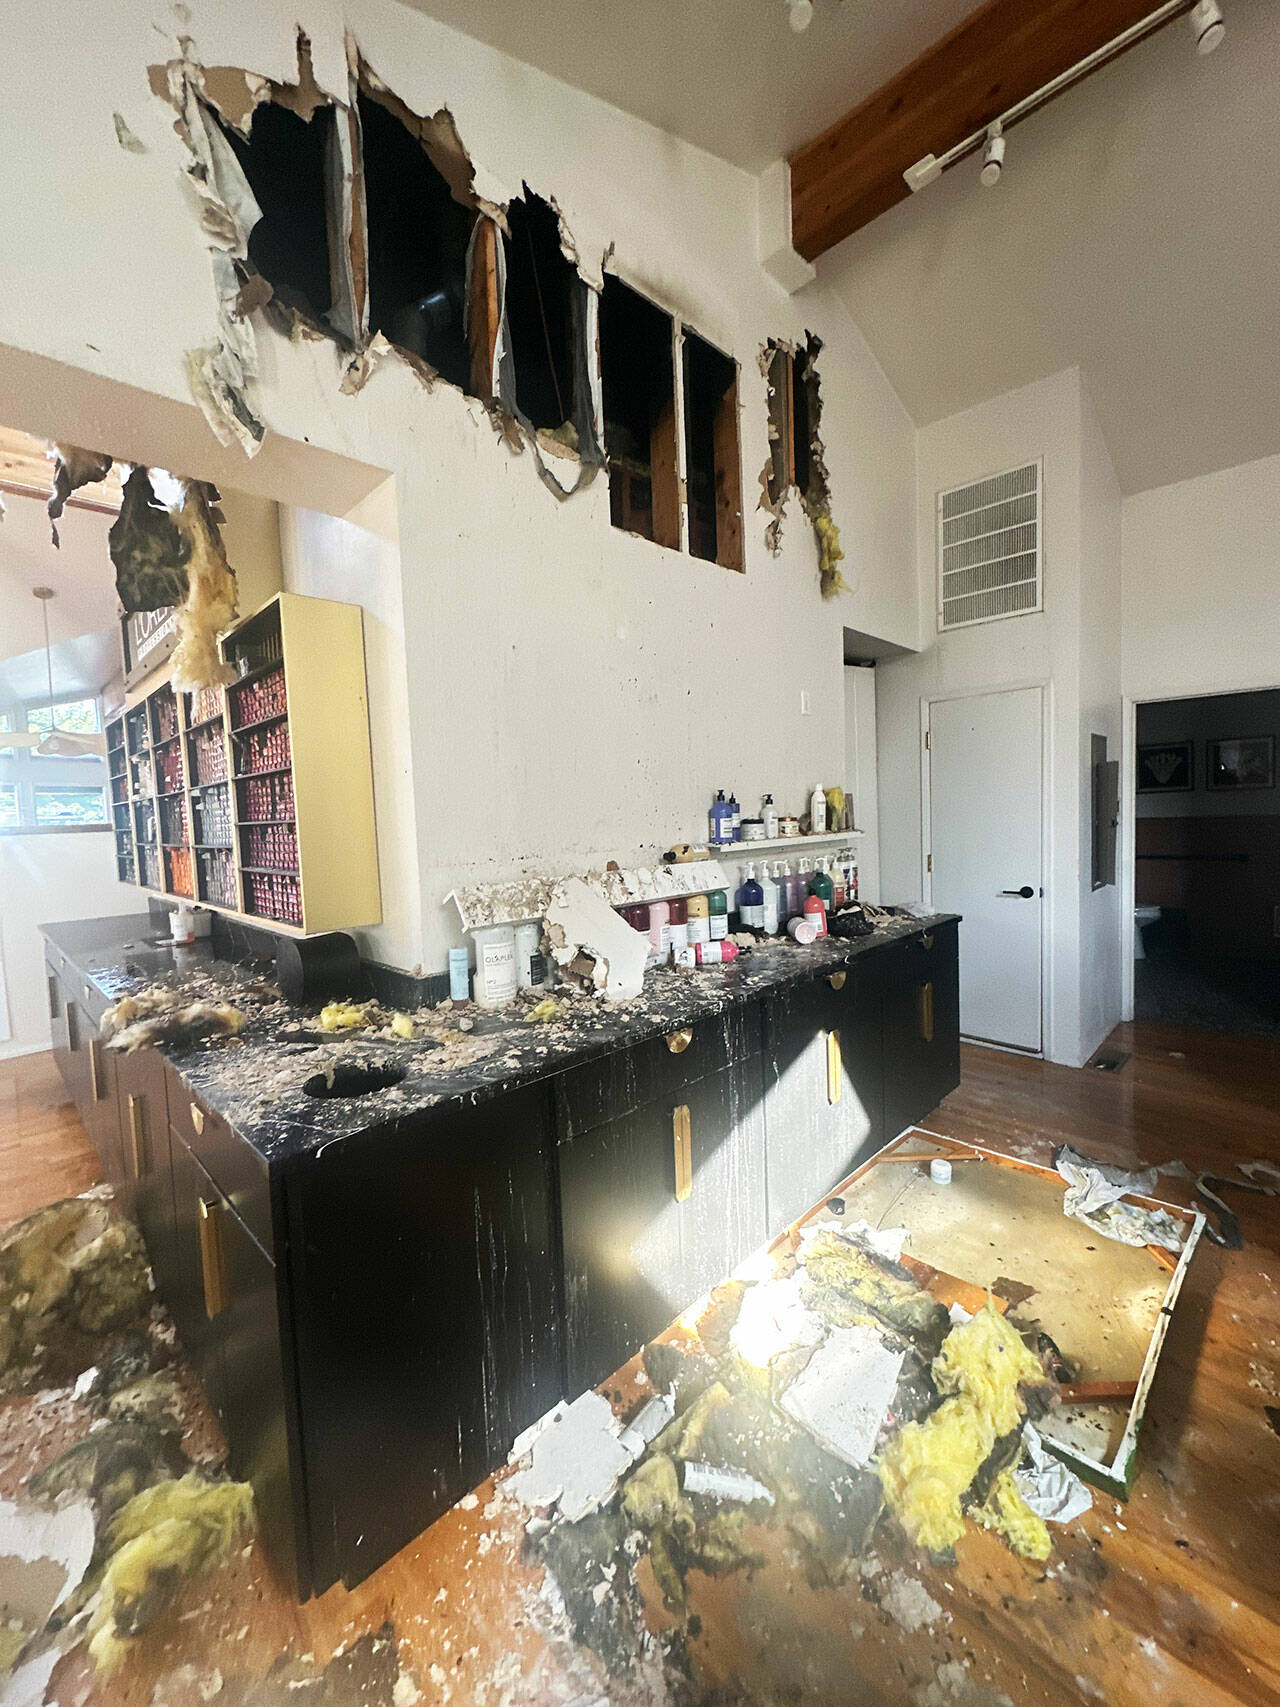 Damage at Wilder and Free Beauty Company in Kent after a Sept. 2 fire. COURTESY PHOTO, Stacy Love